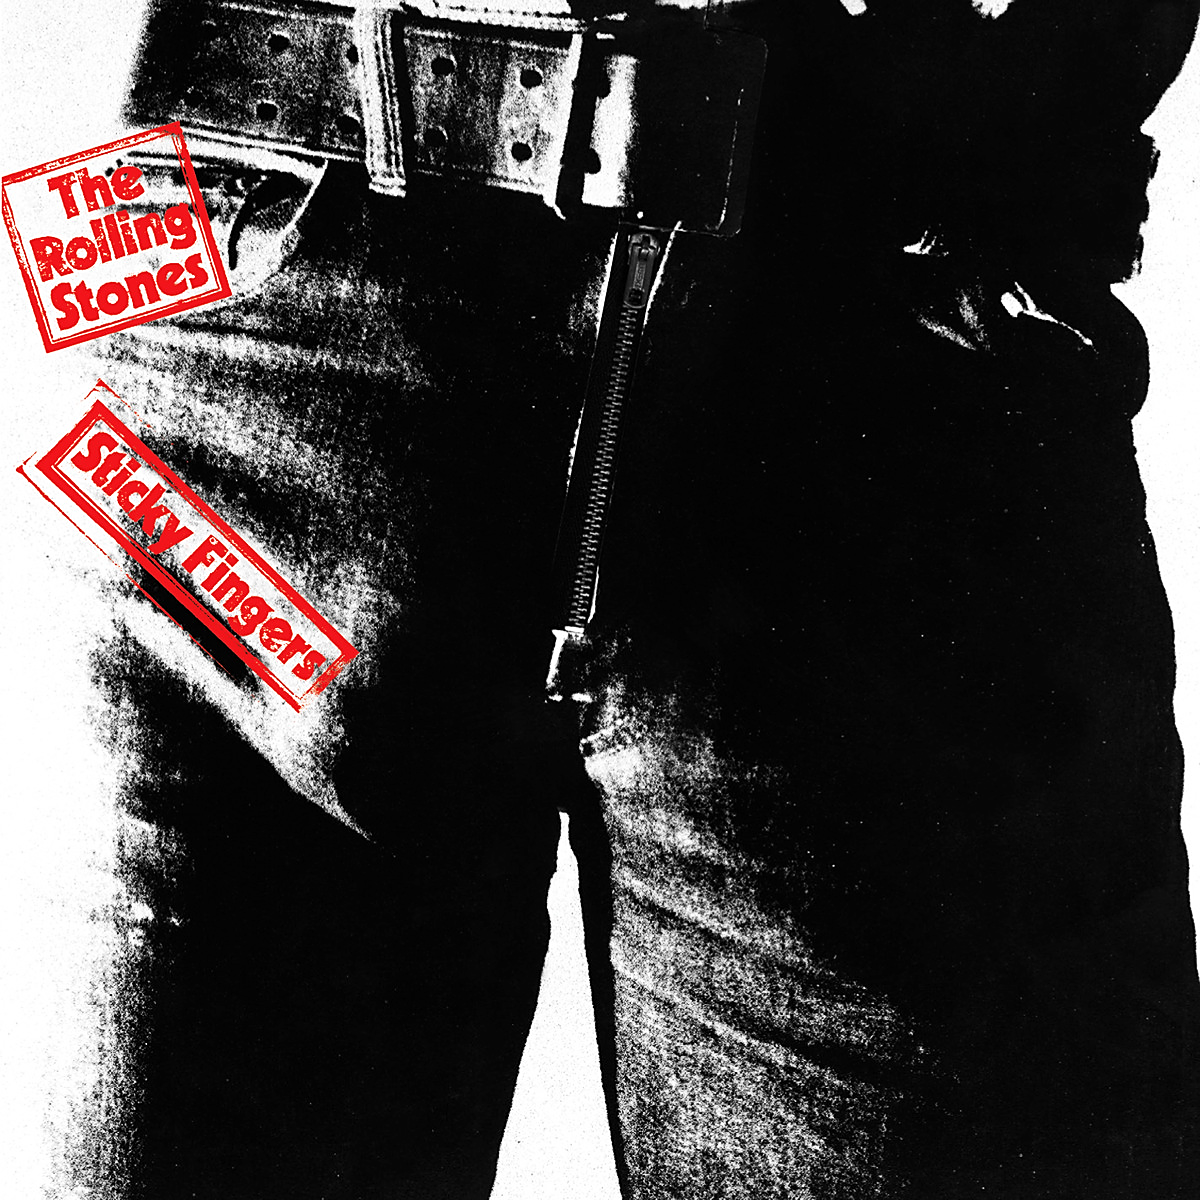 The Rolling Stones-Sticky Fingers-Remastered Deluxe Edition-2CD-FLAC-2015-FORSAKEN Download